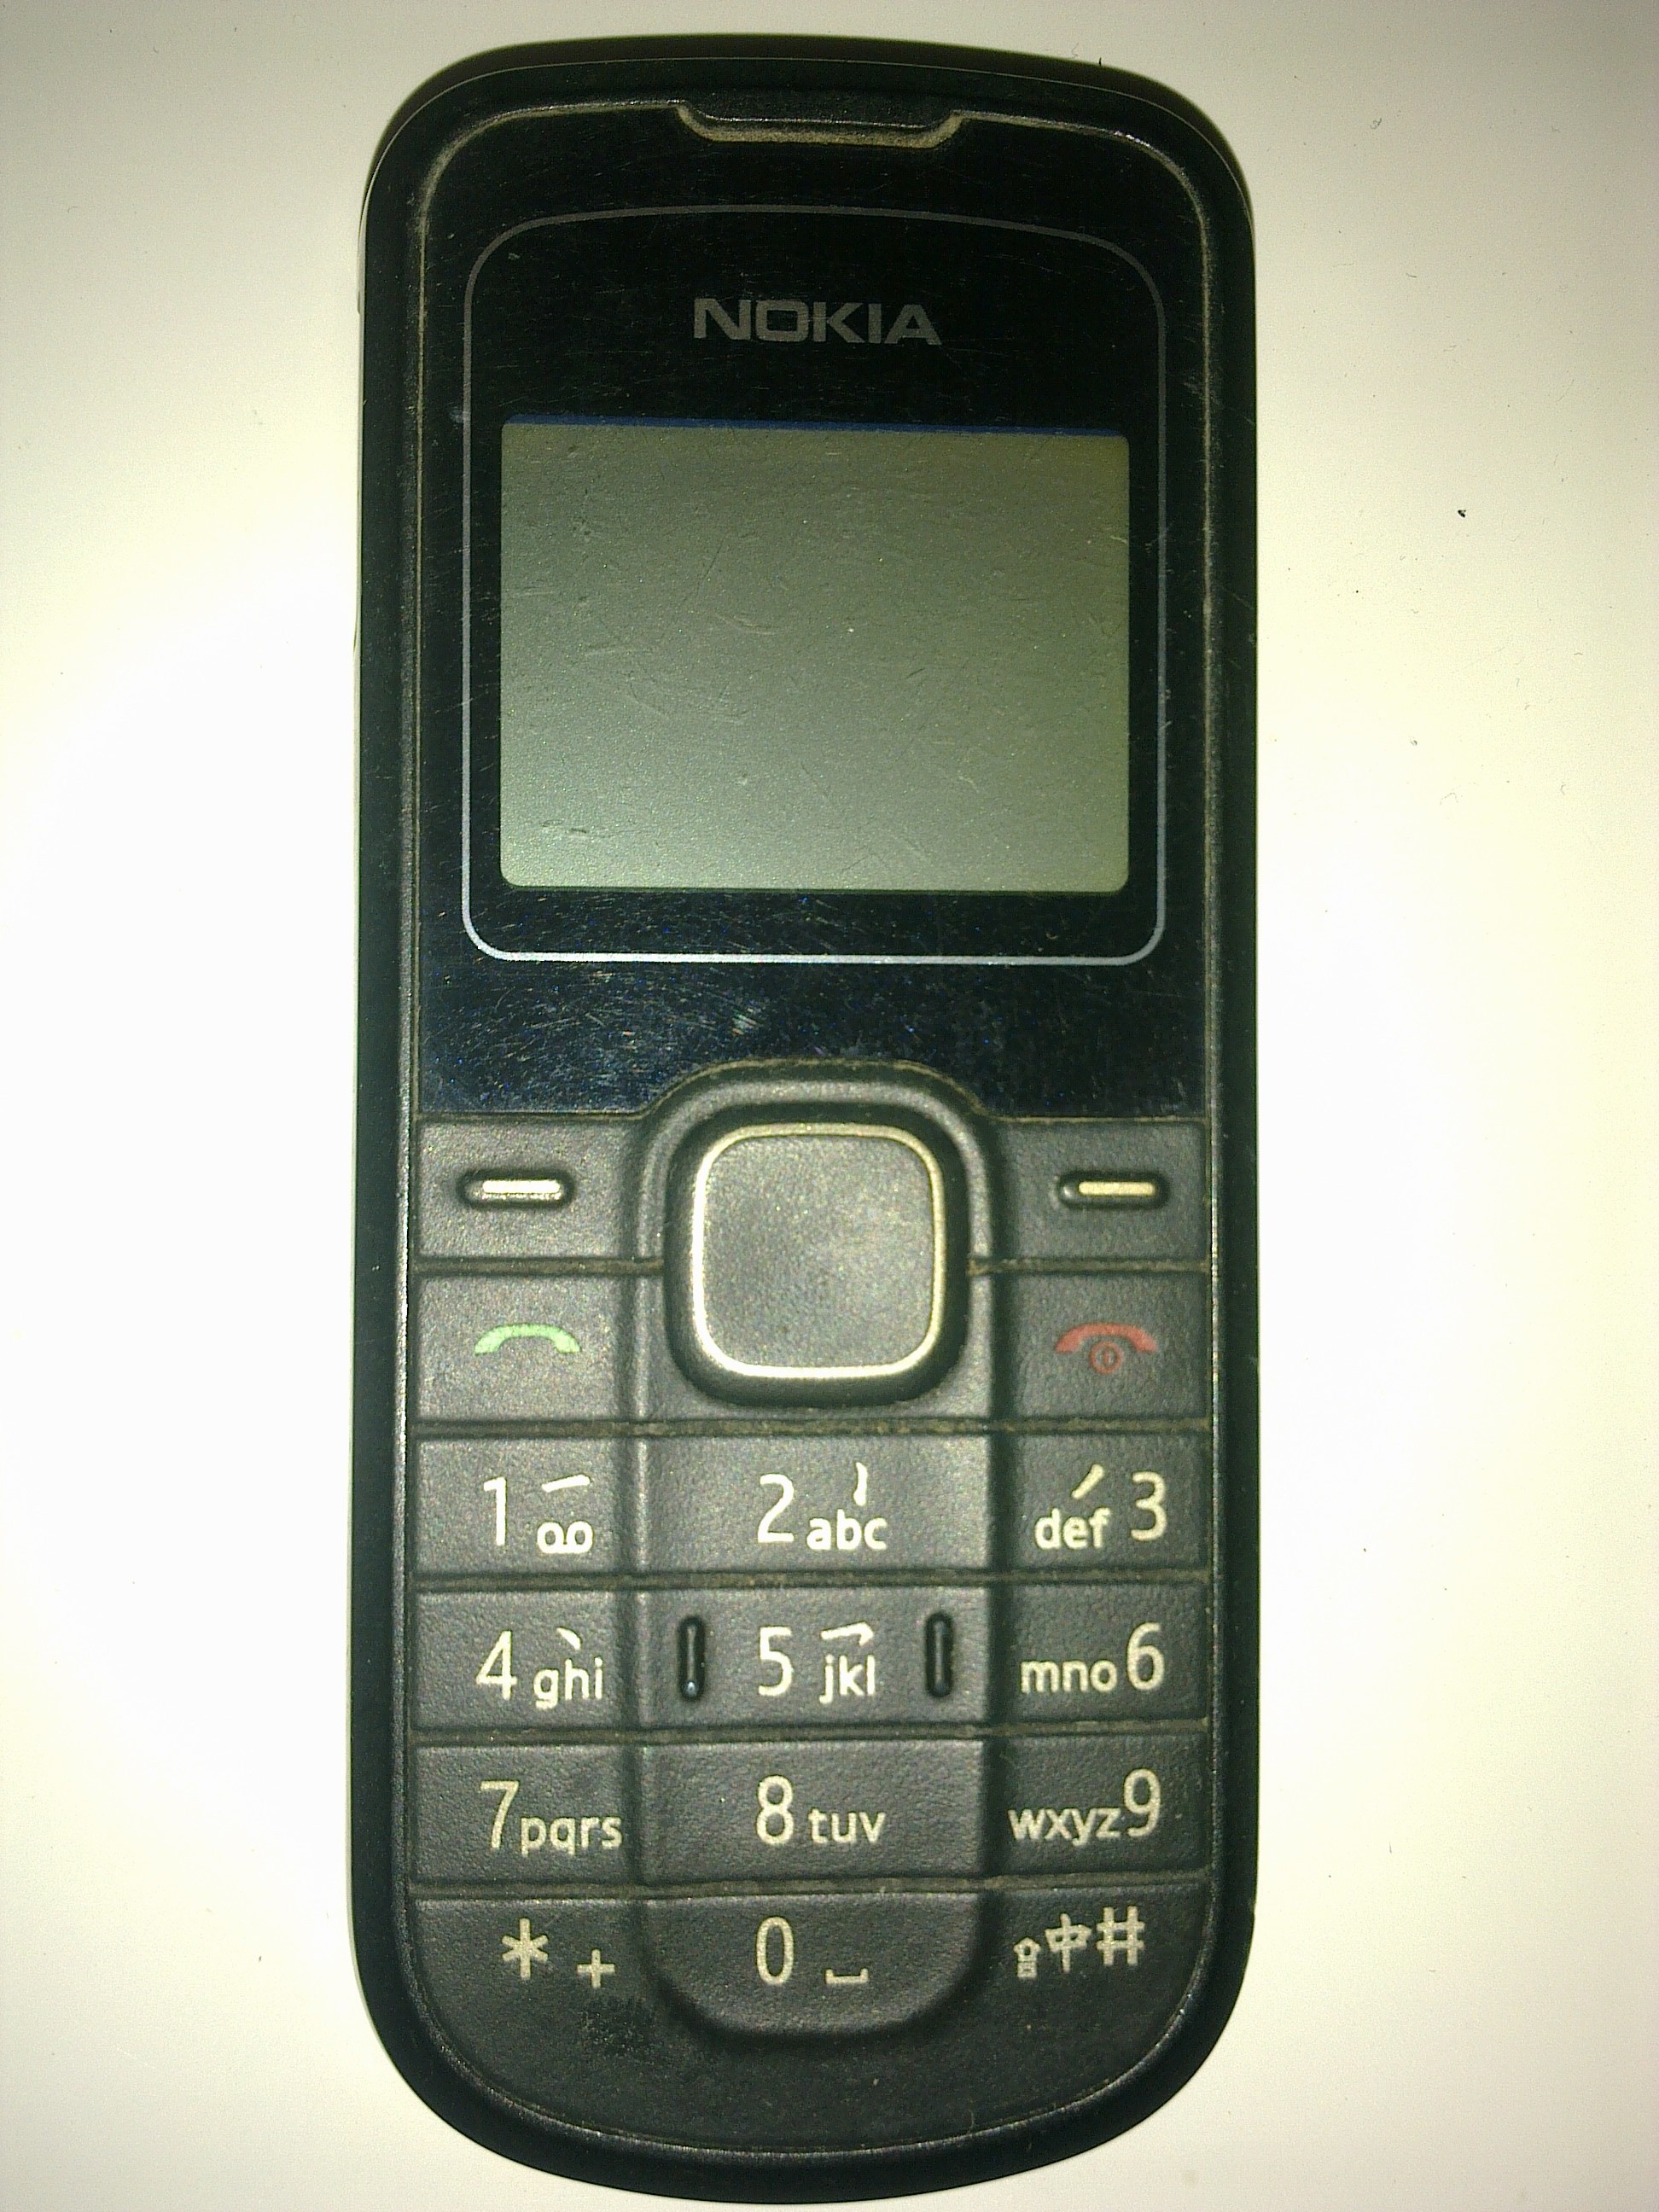 Nokia 1202-2 For sale large image 0